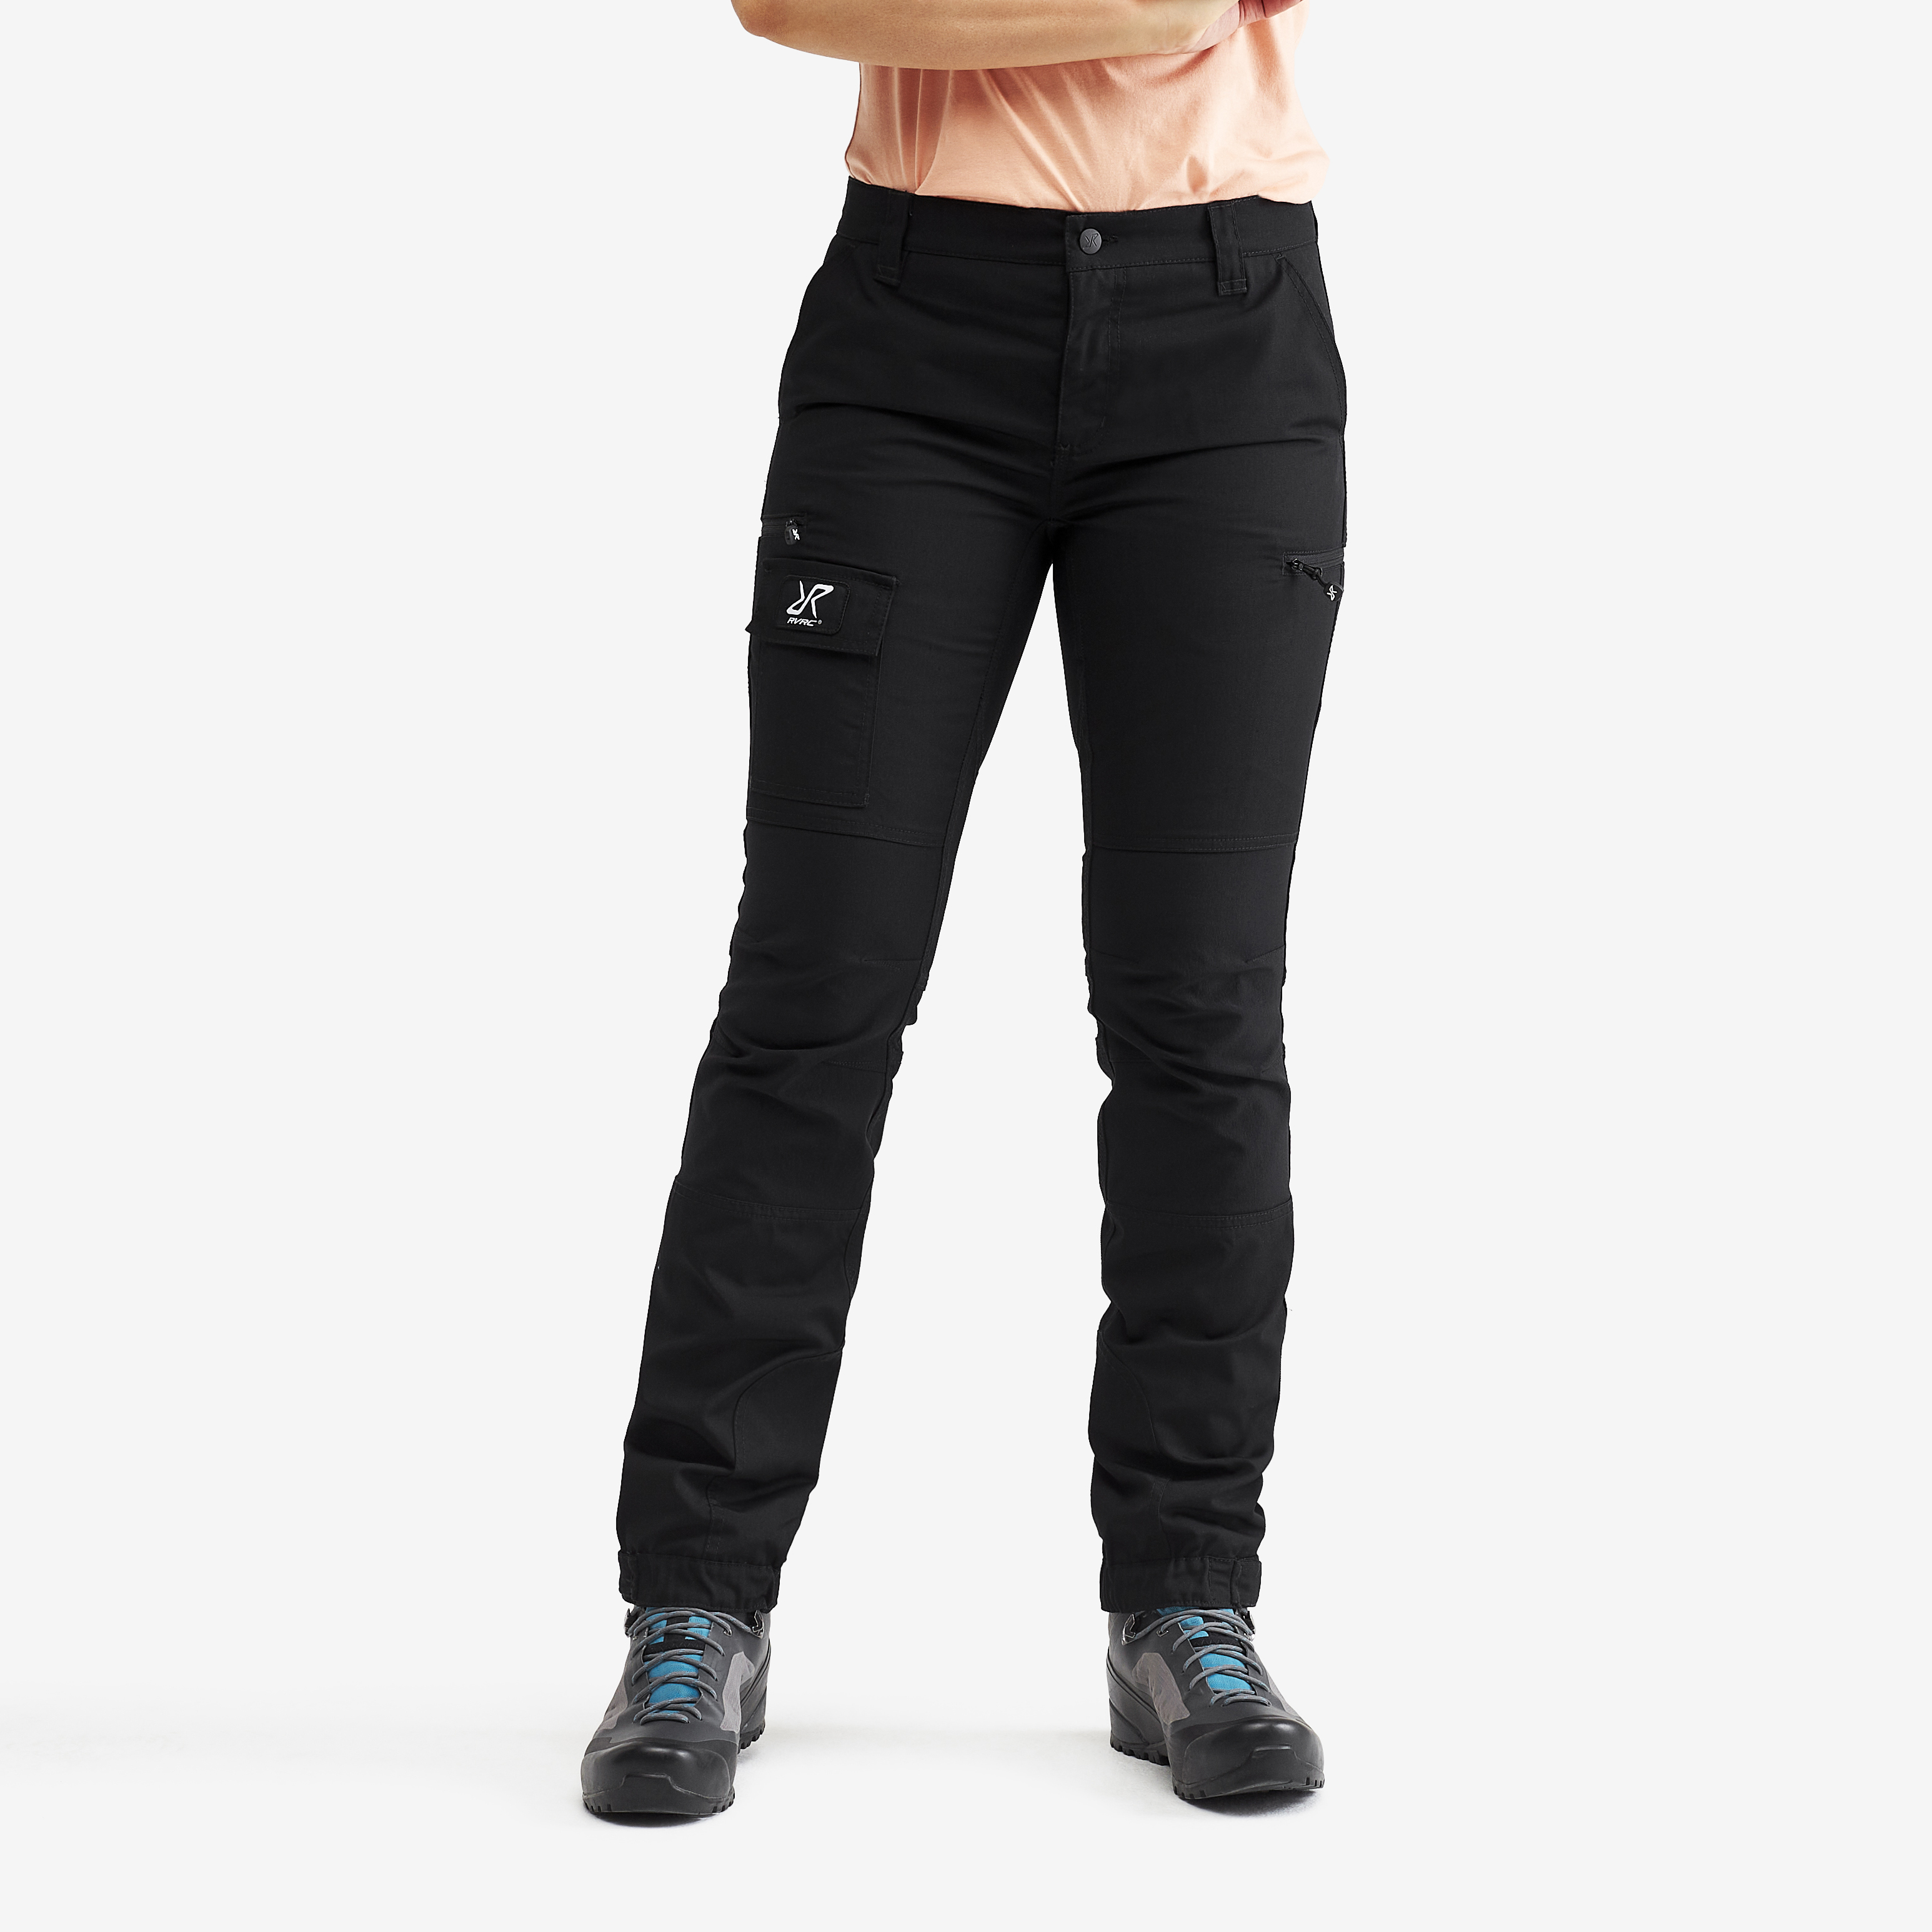 Nordwand outdoor pants for women in black